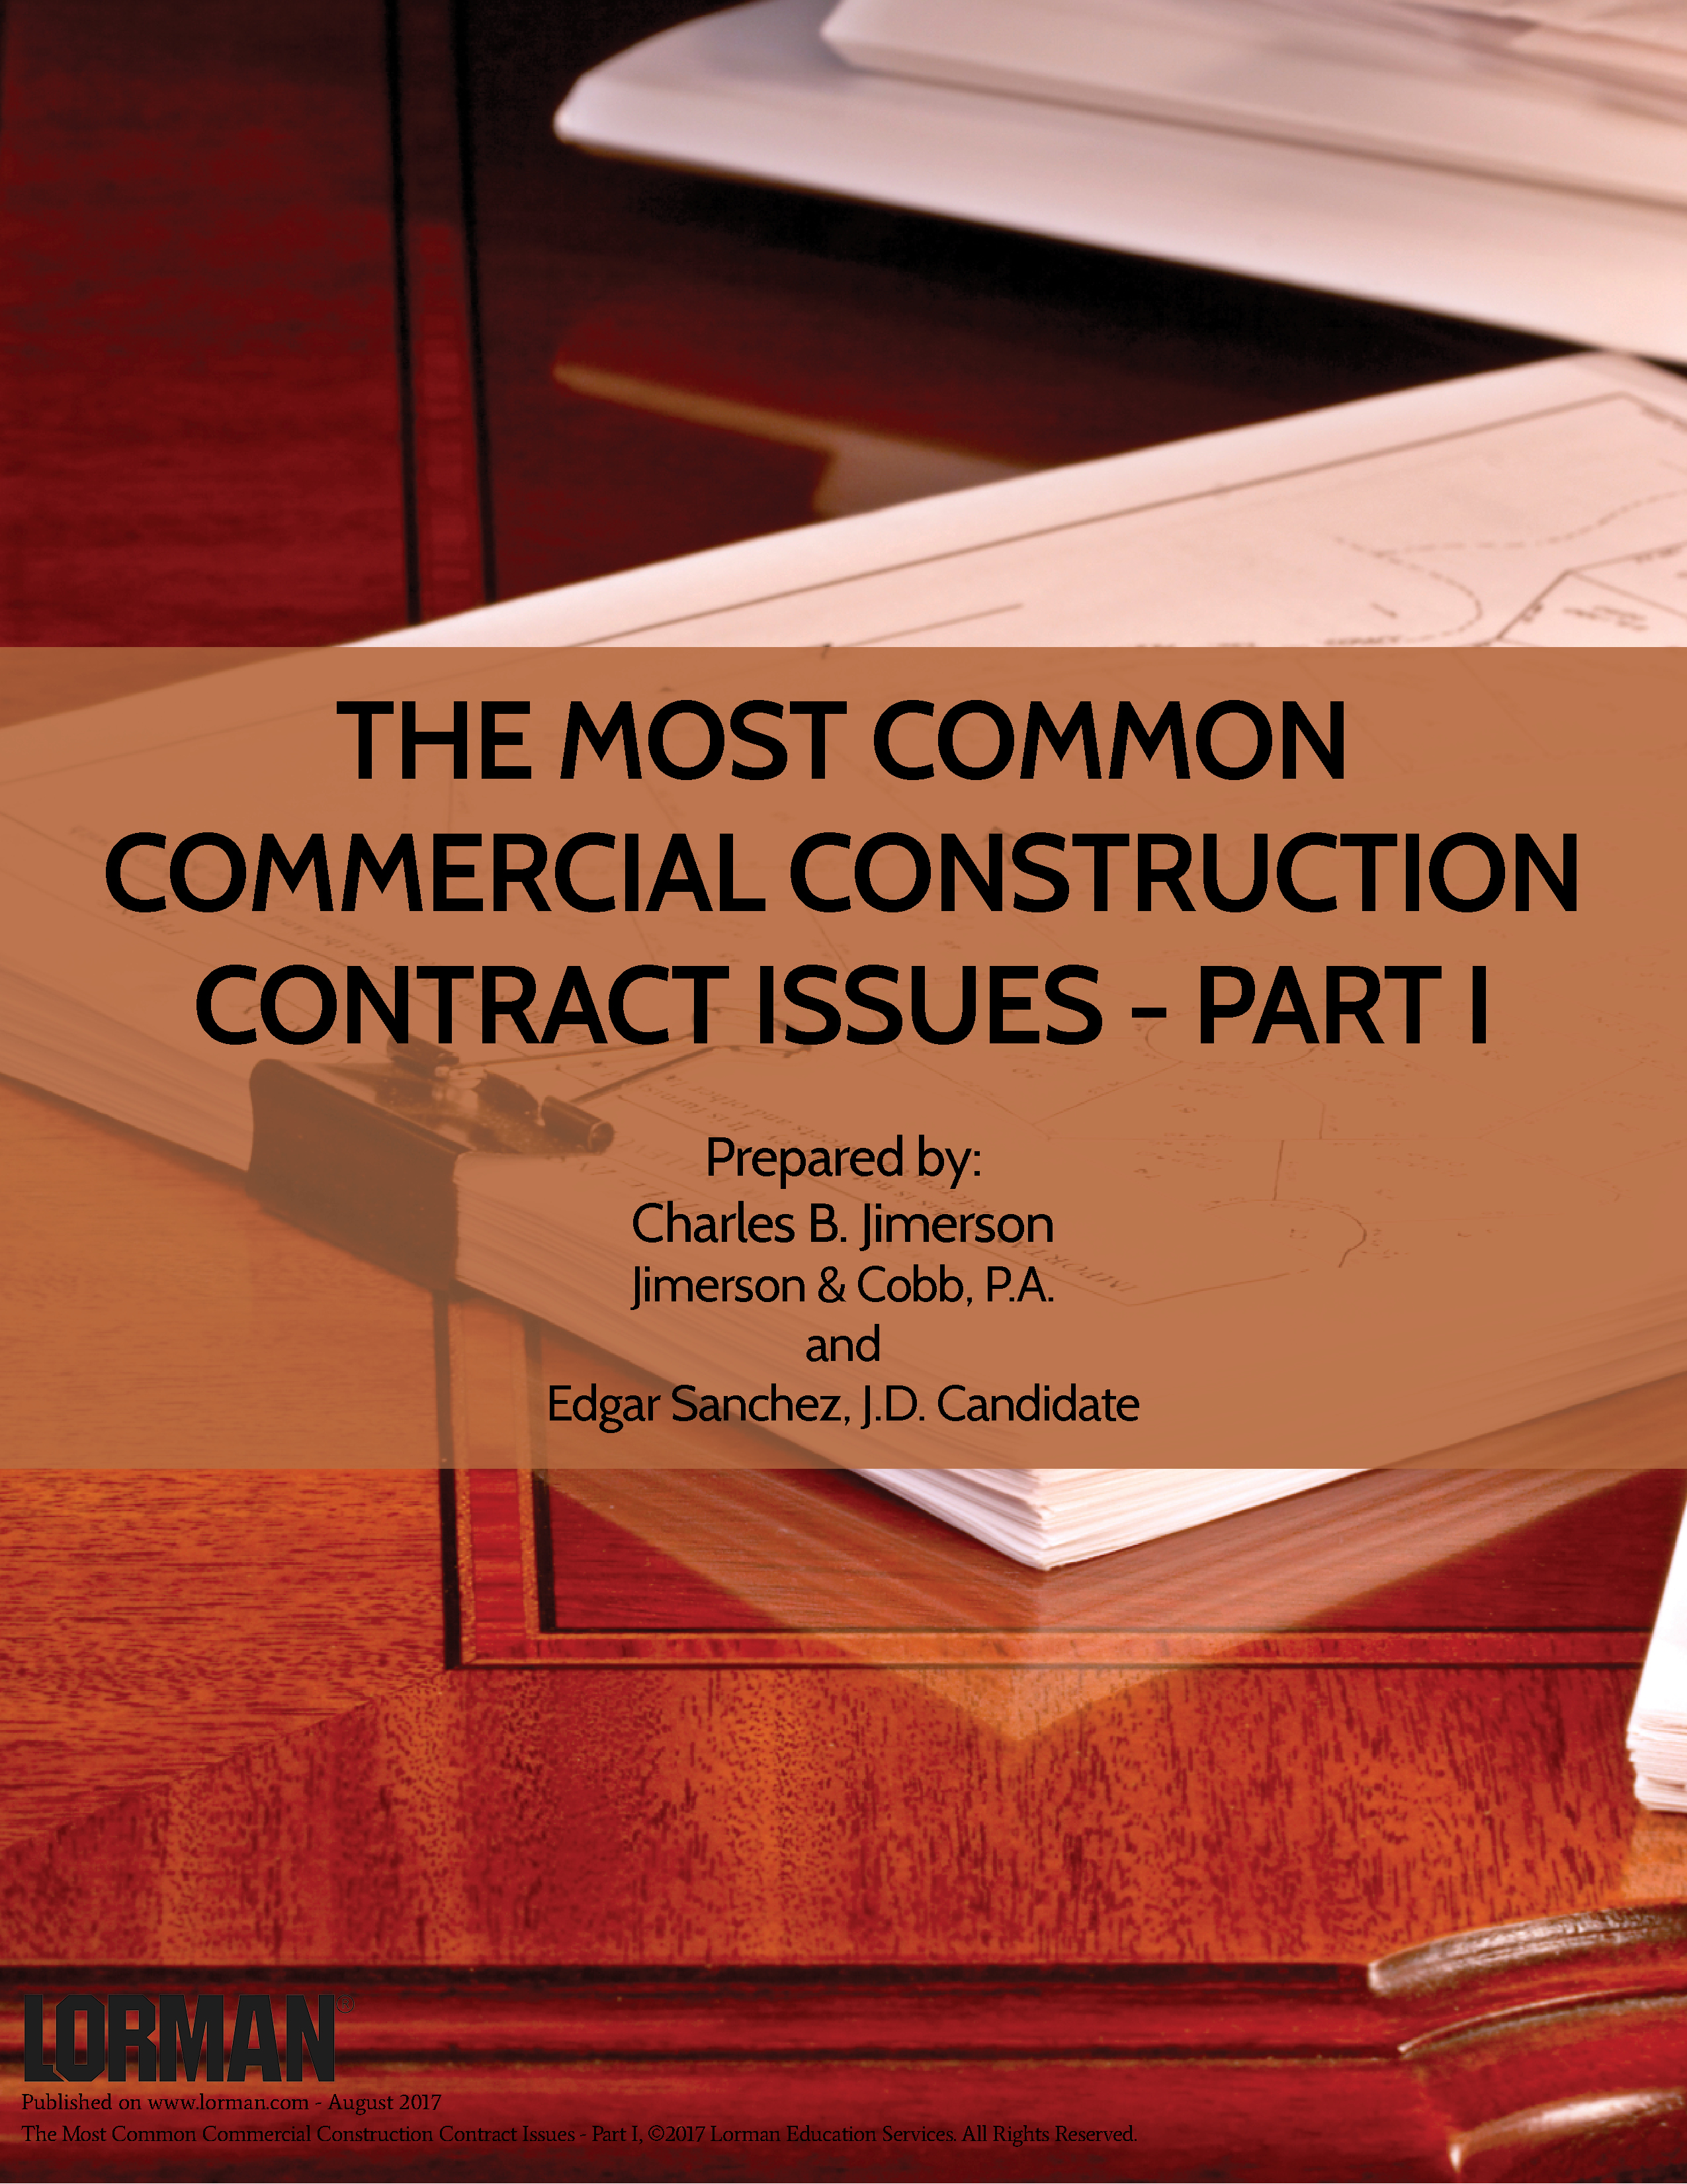 The Most Common Commercial Construction Contract Issues - Part I